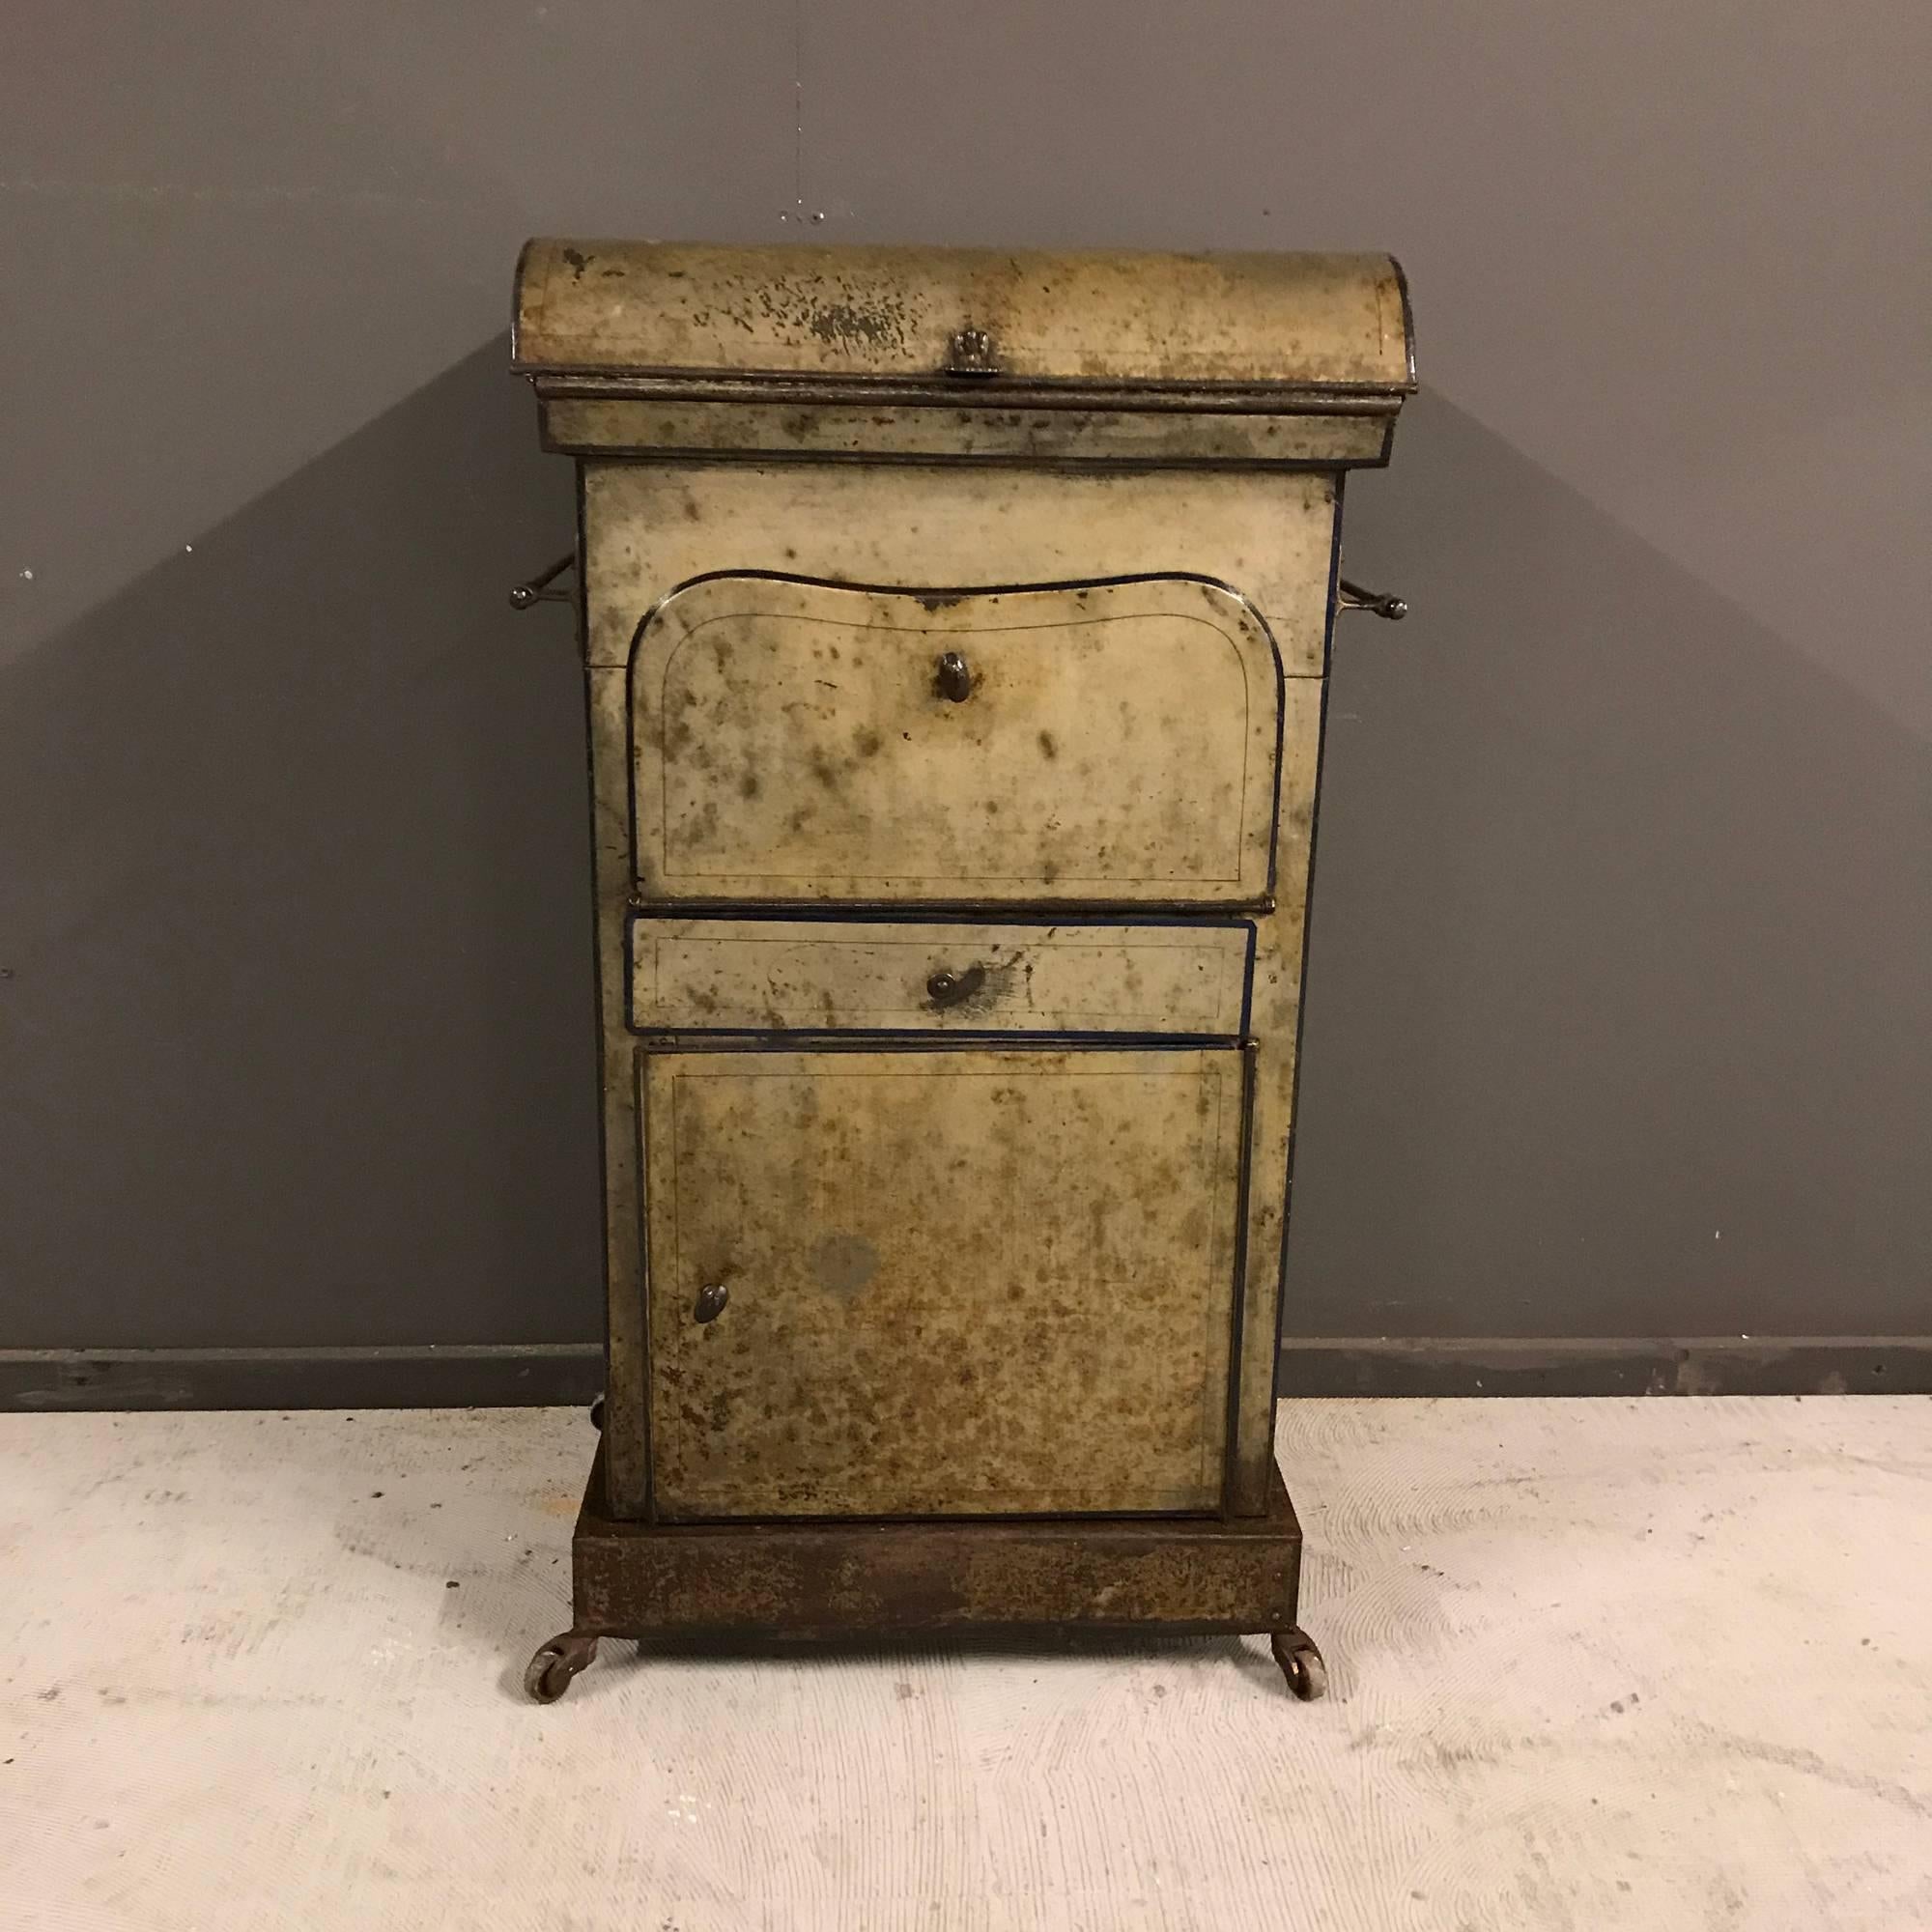 Rare antique wash stand.
Made in France and was used on a boat.
Metal frame with cast iron details and wheels.
This stand has a gorgeous patina.